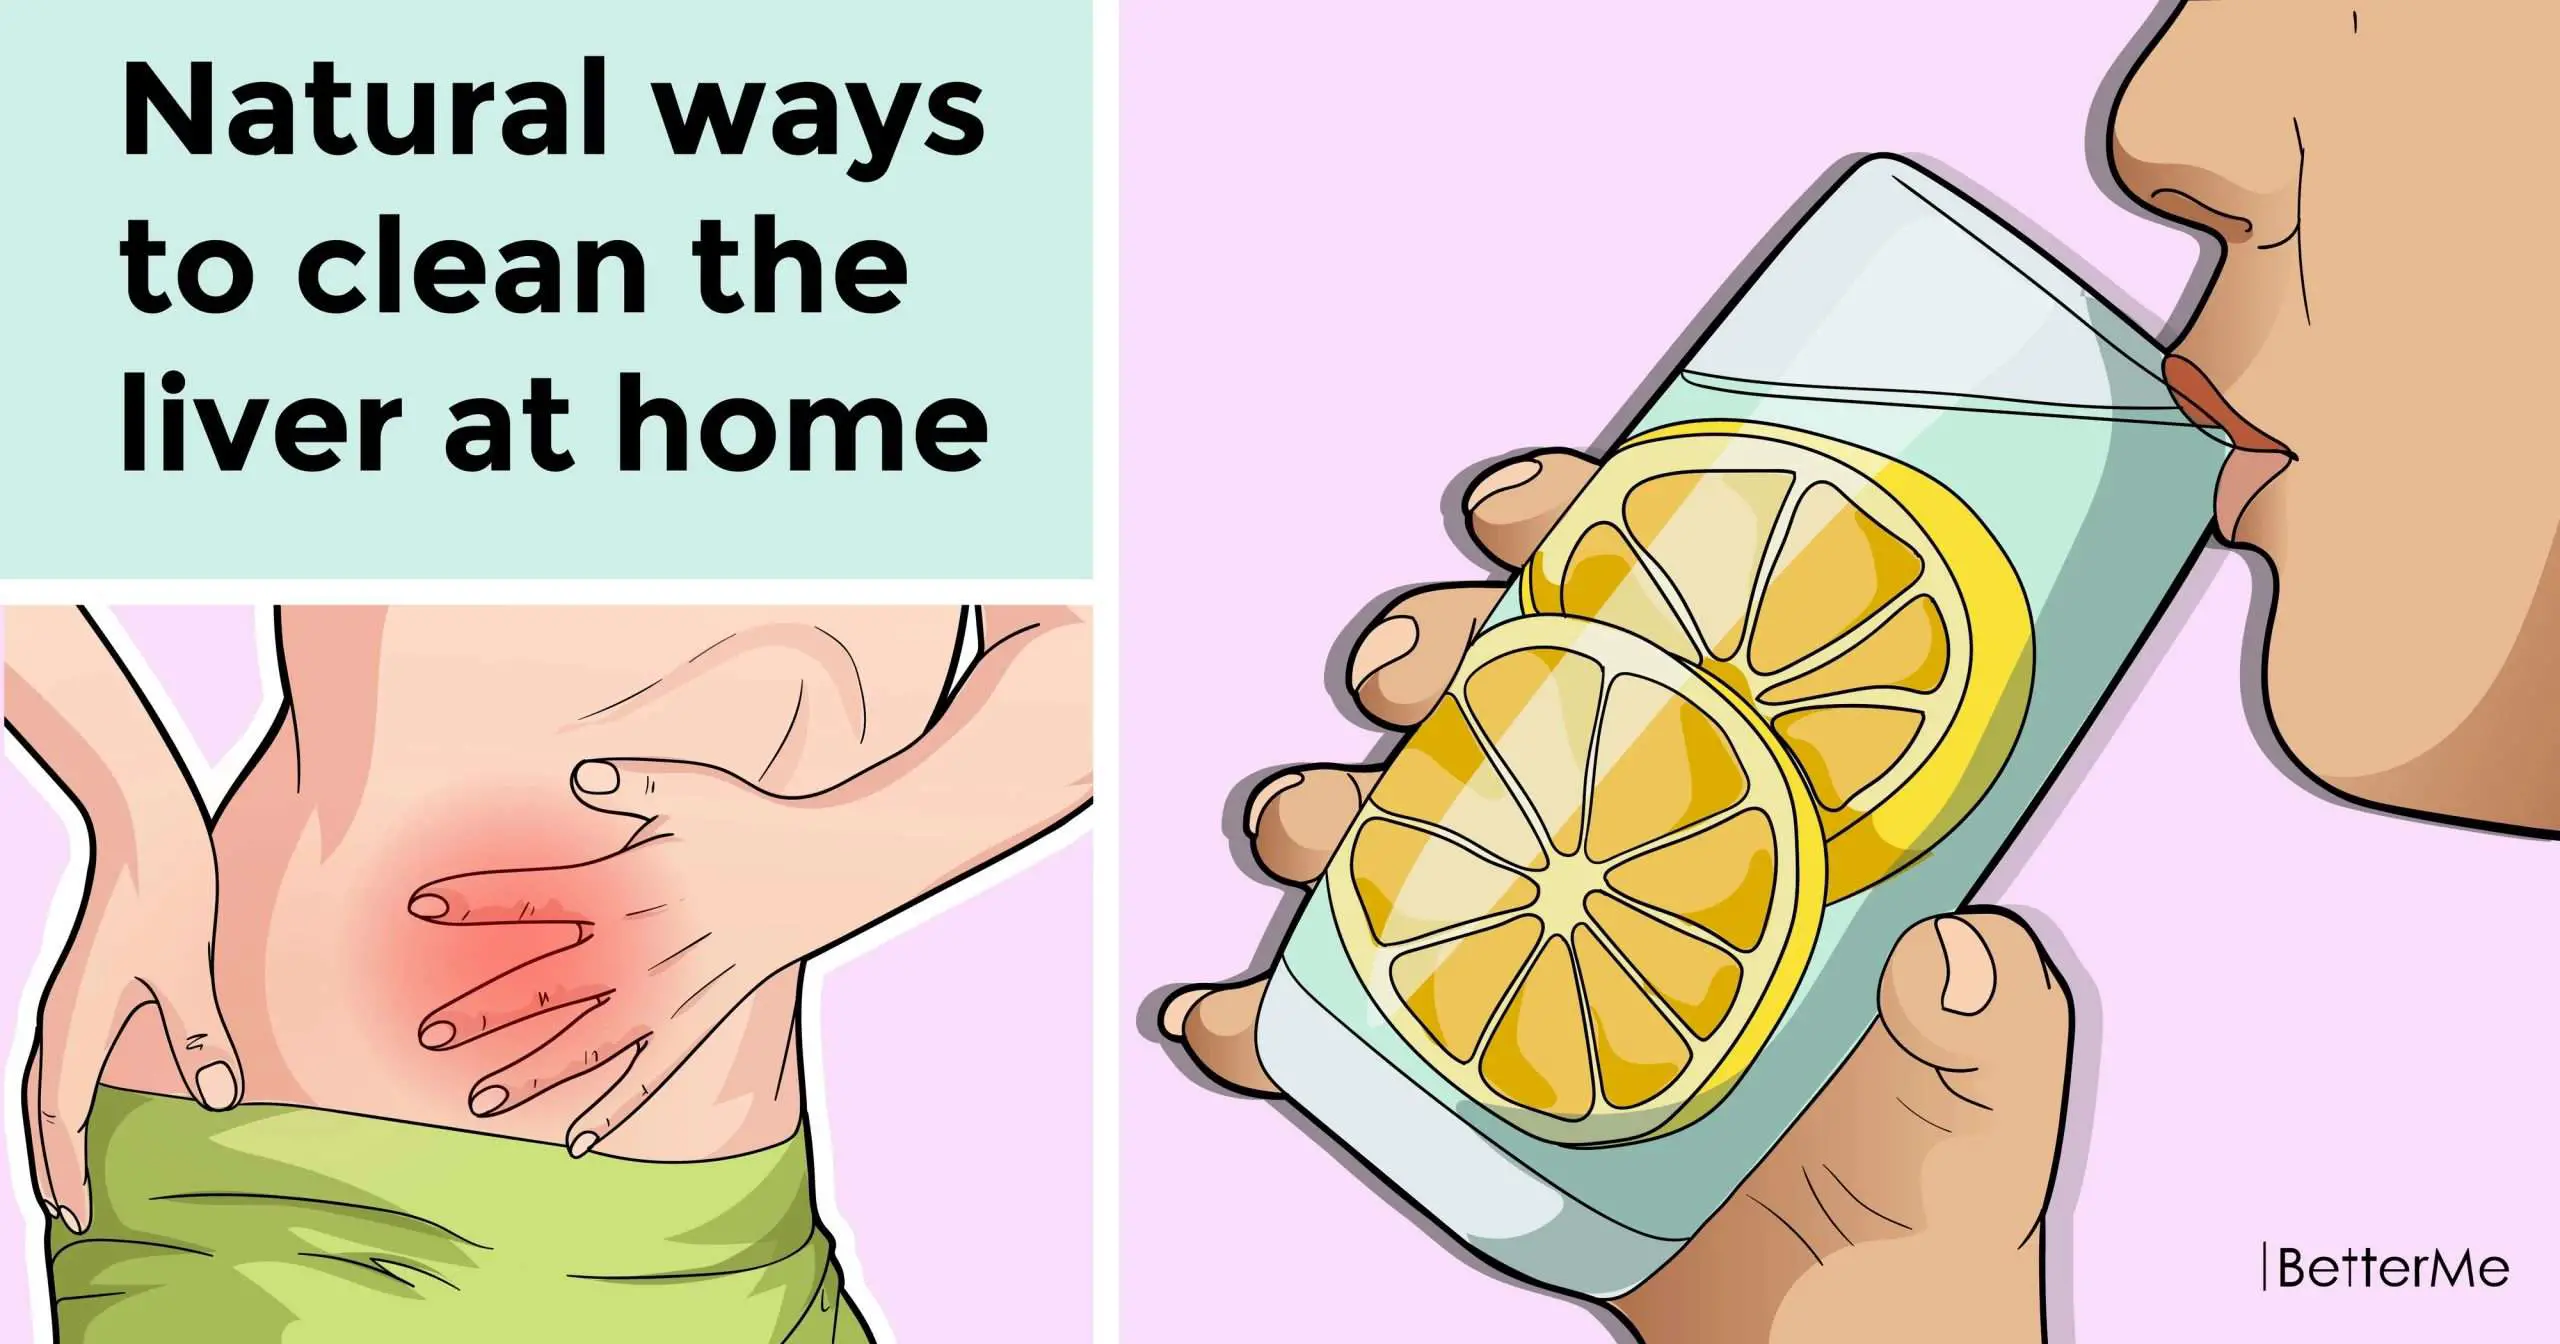 Natural ways to clean the liver at home